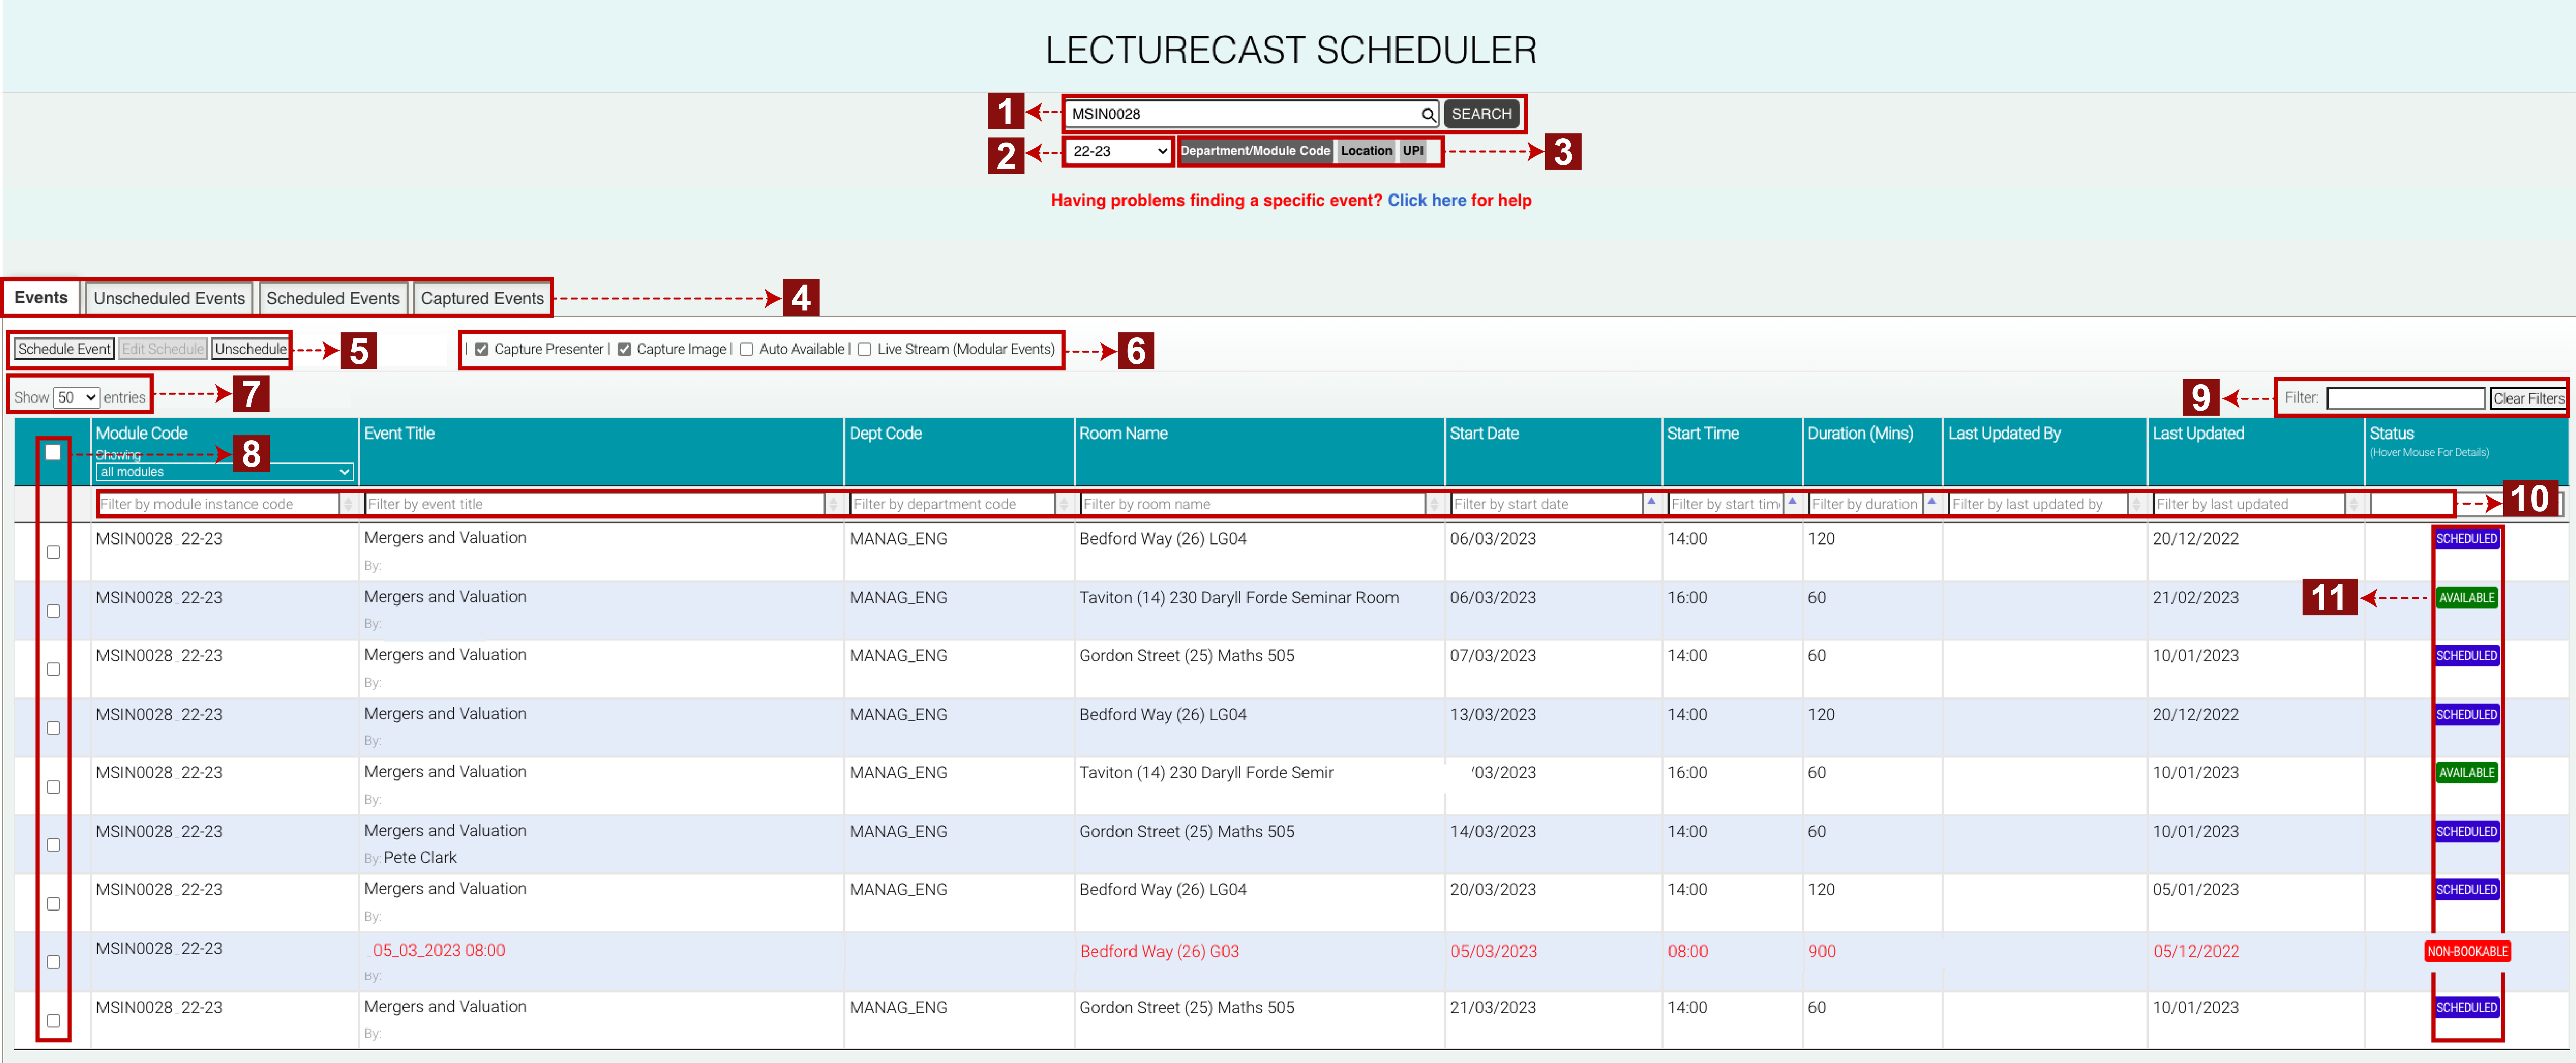 A screenshot of the Lecturecast Scheduler home page with various interactive elements highlighted and numbered.